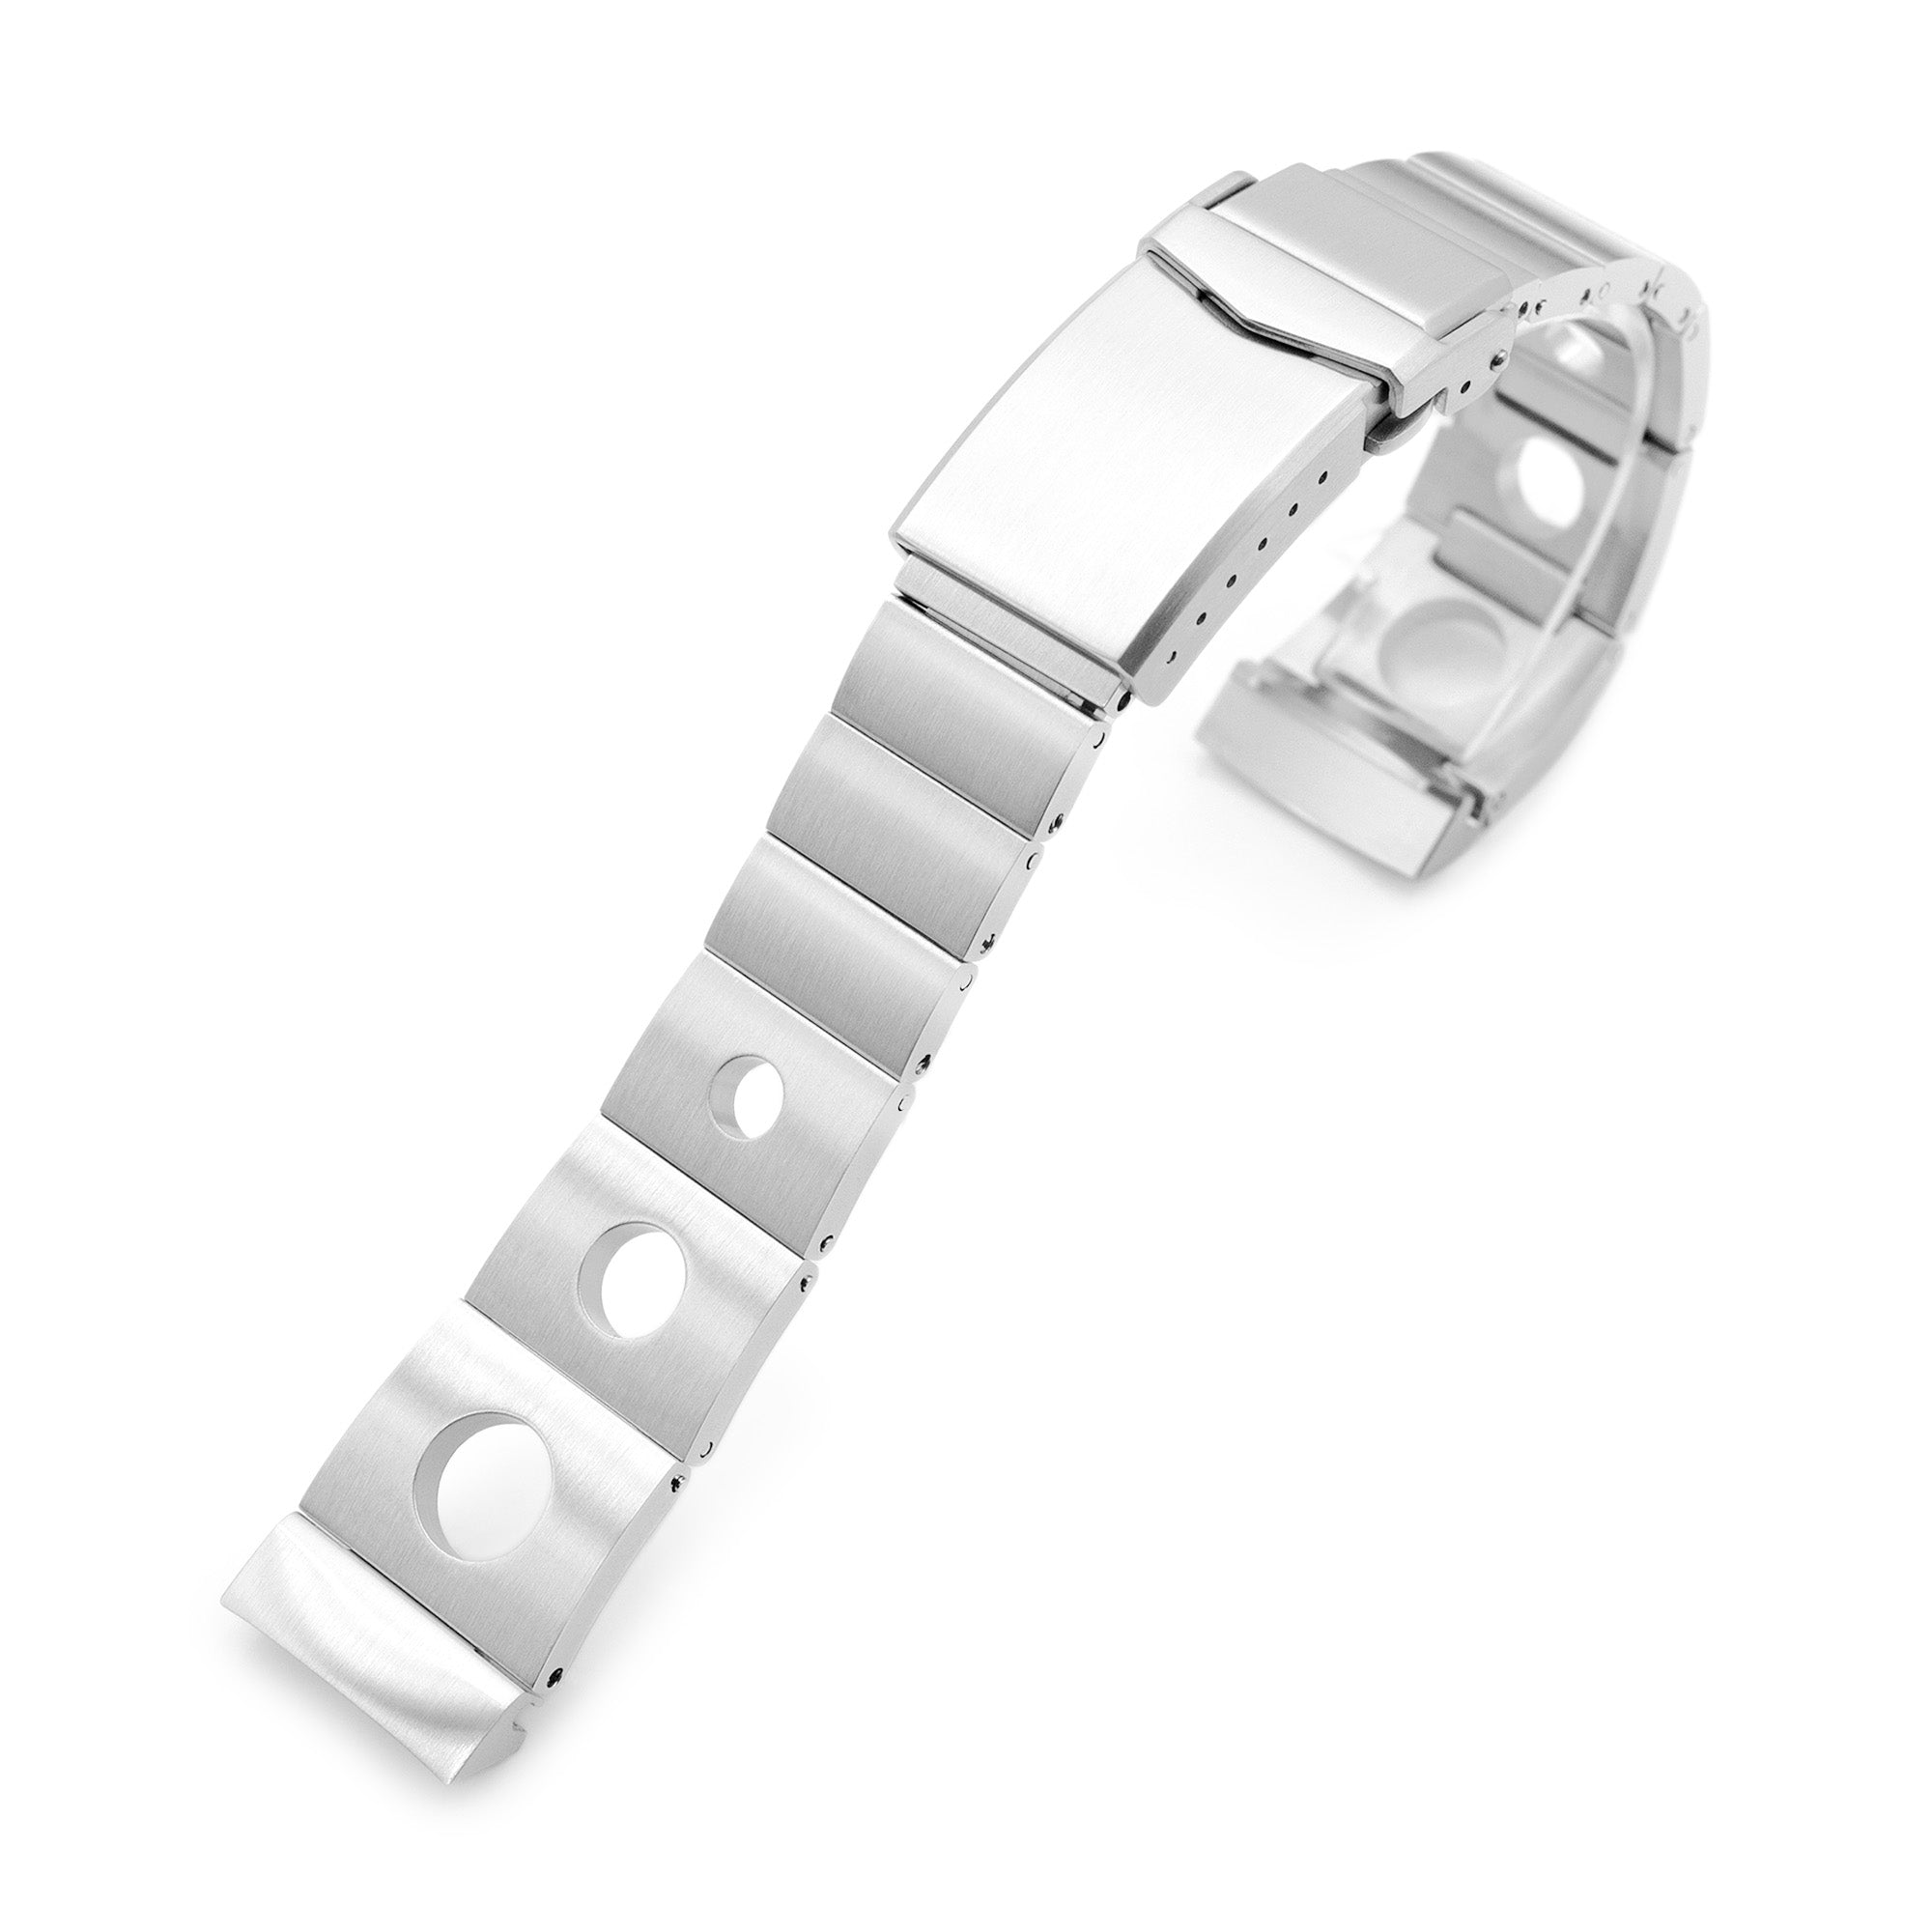 20mm Rollball version II Watch Band for Seiko SSC813P1, 316L Stainless Steel Brushed V-Clasp Strapcode Watch Bands